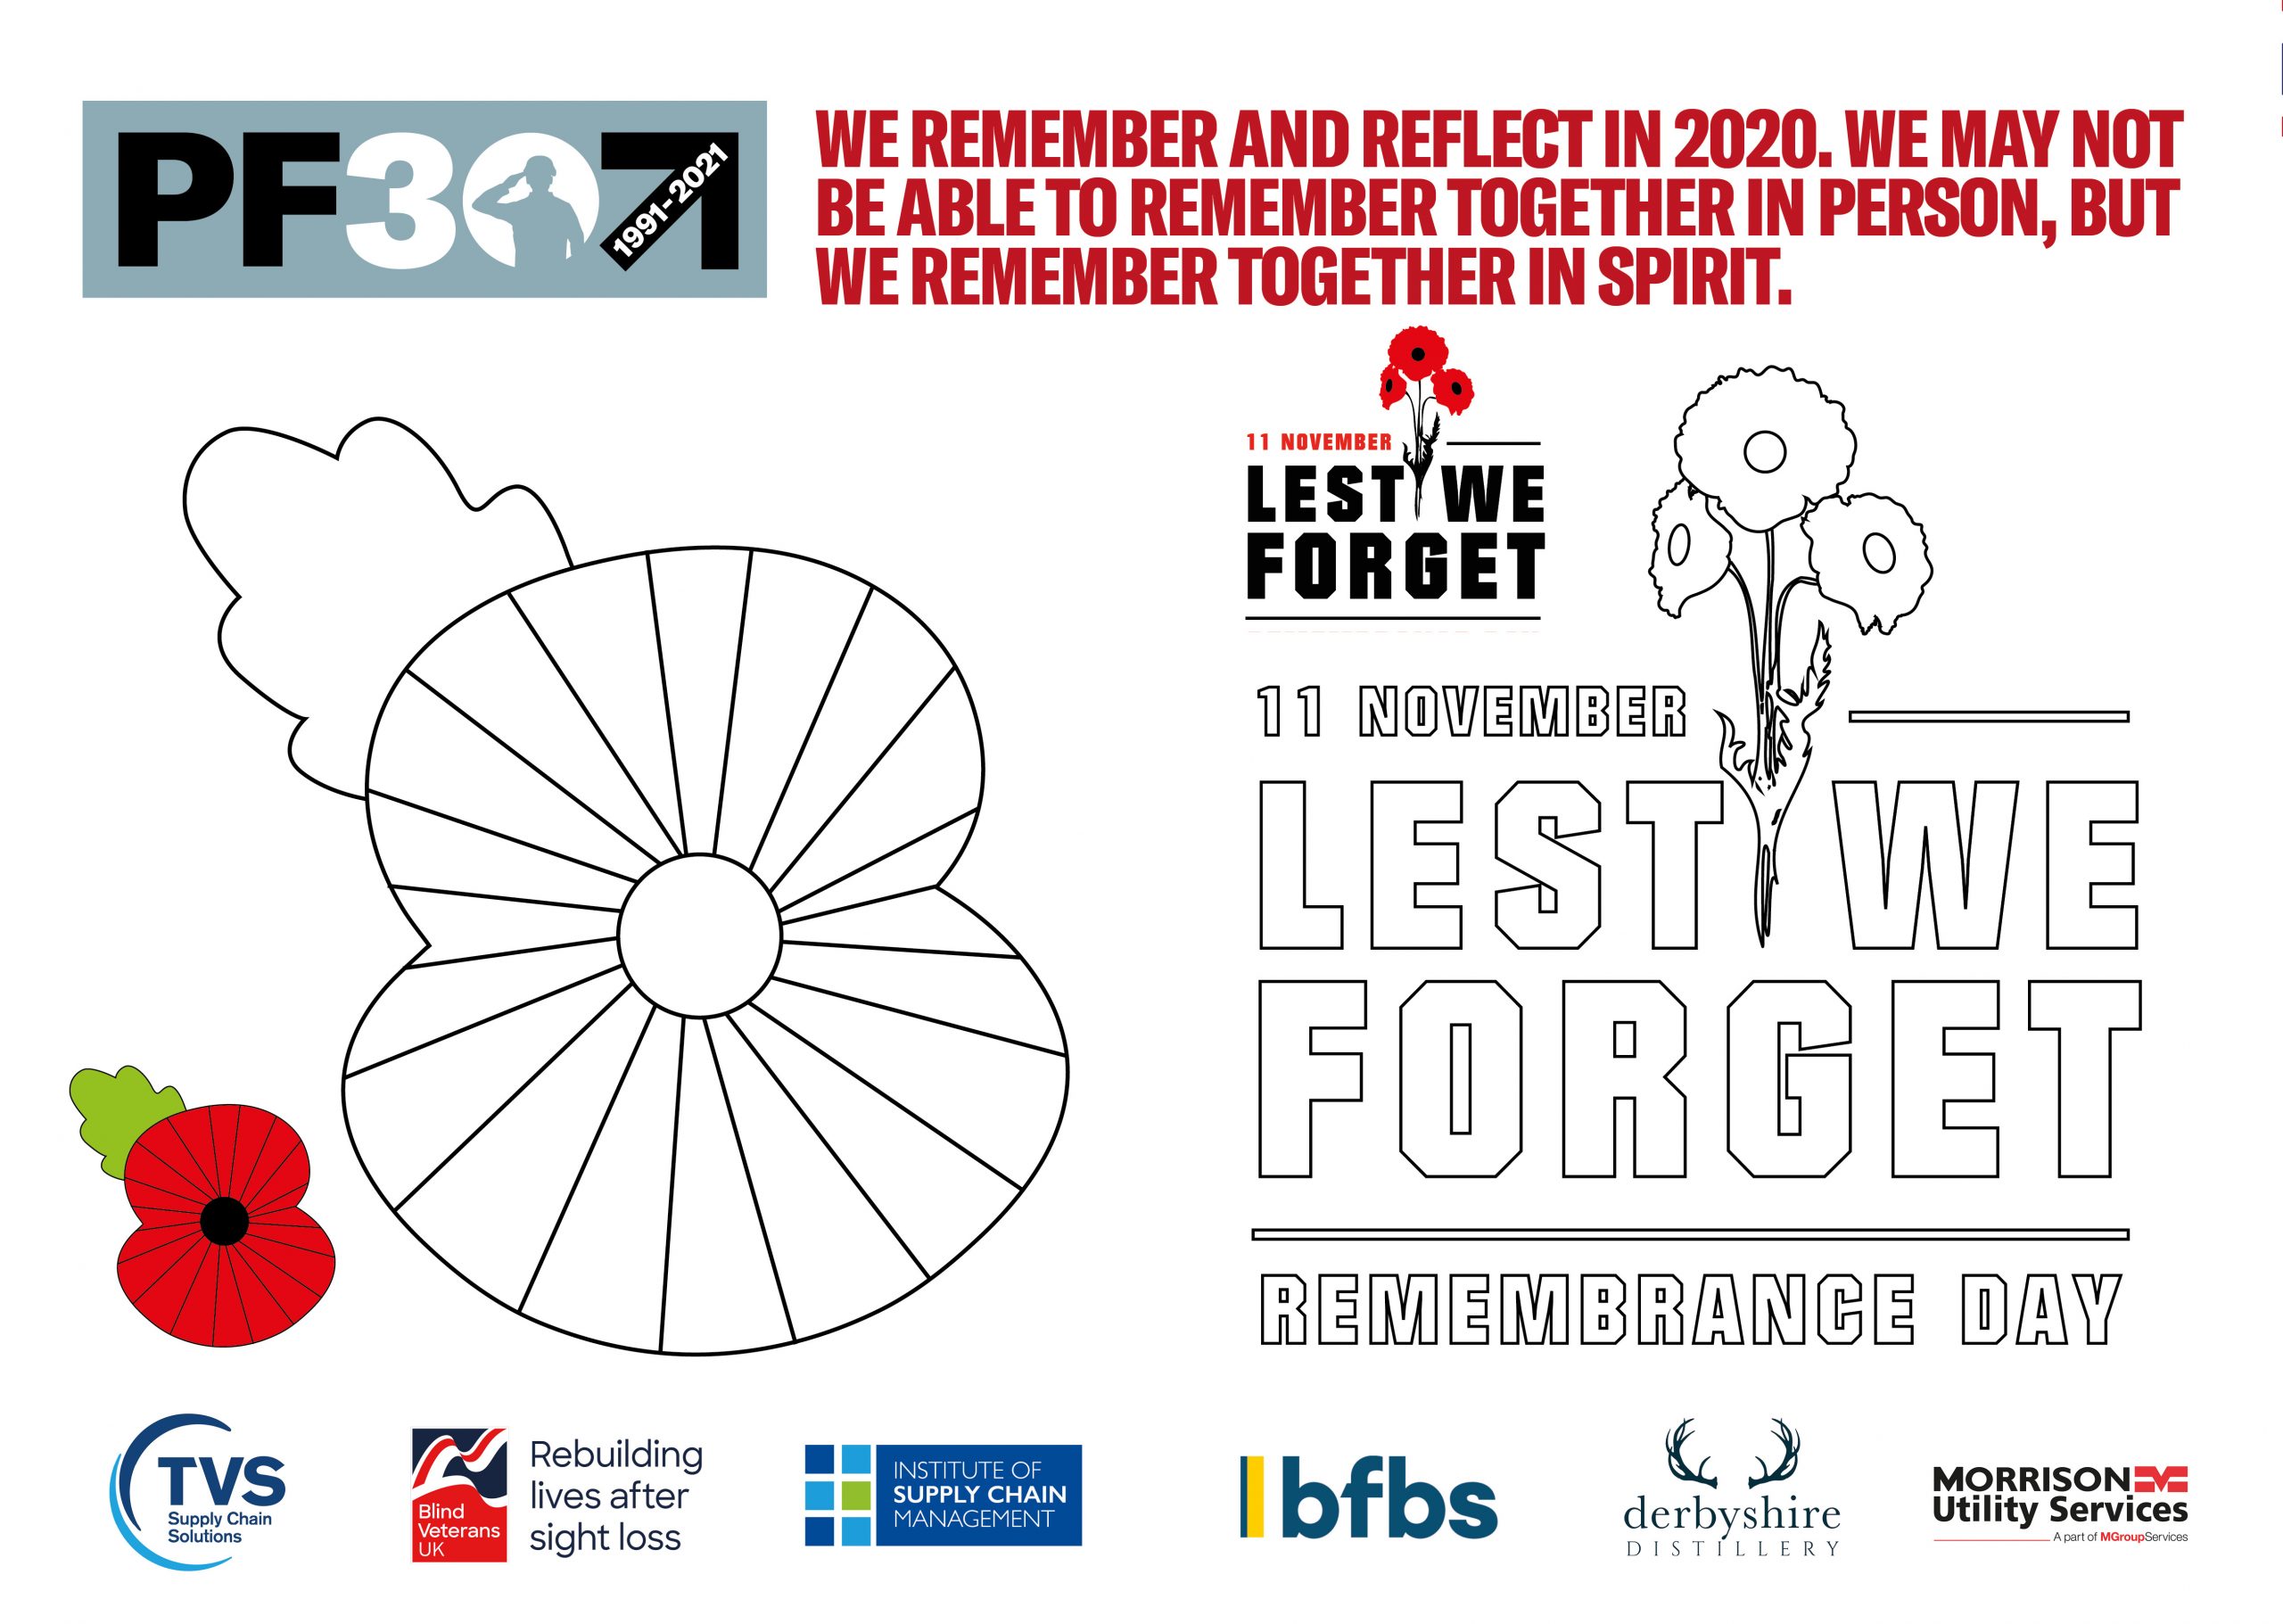 Download The Pathfinder International Magazine Remembrance 2020 Poster And Remember Together